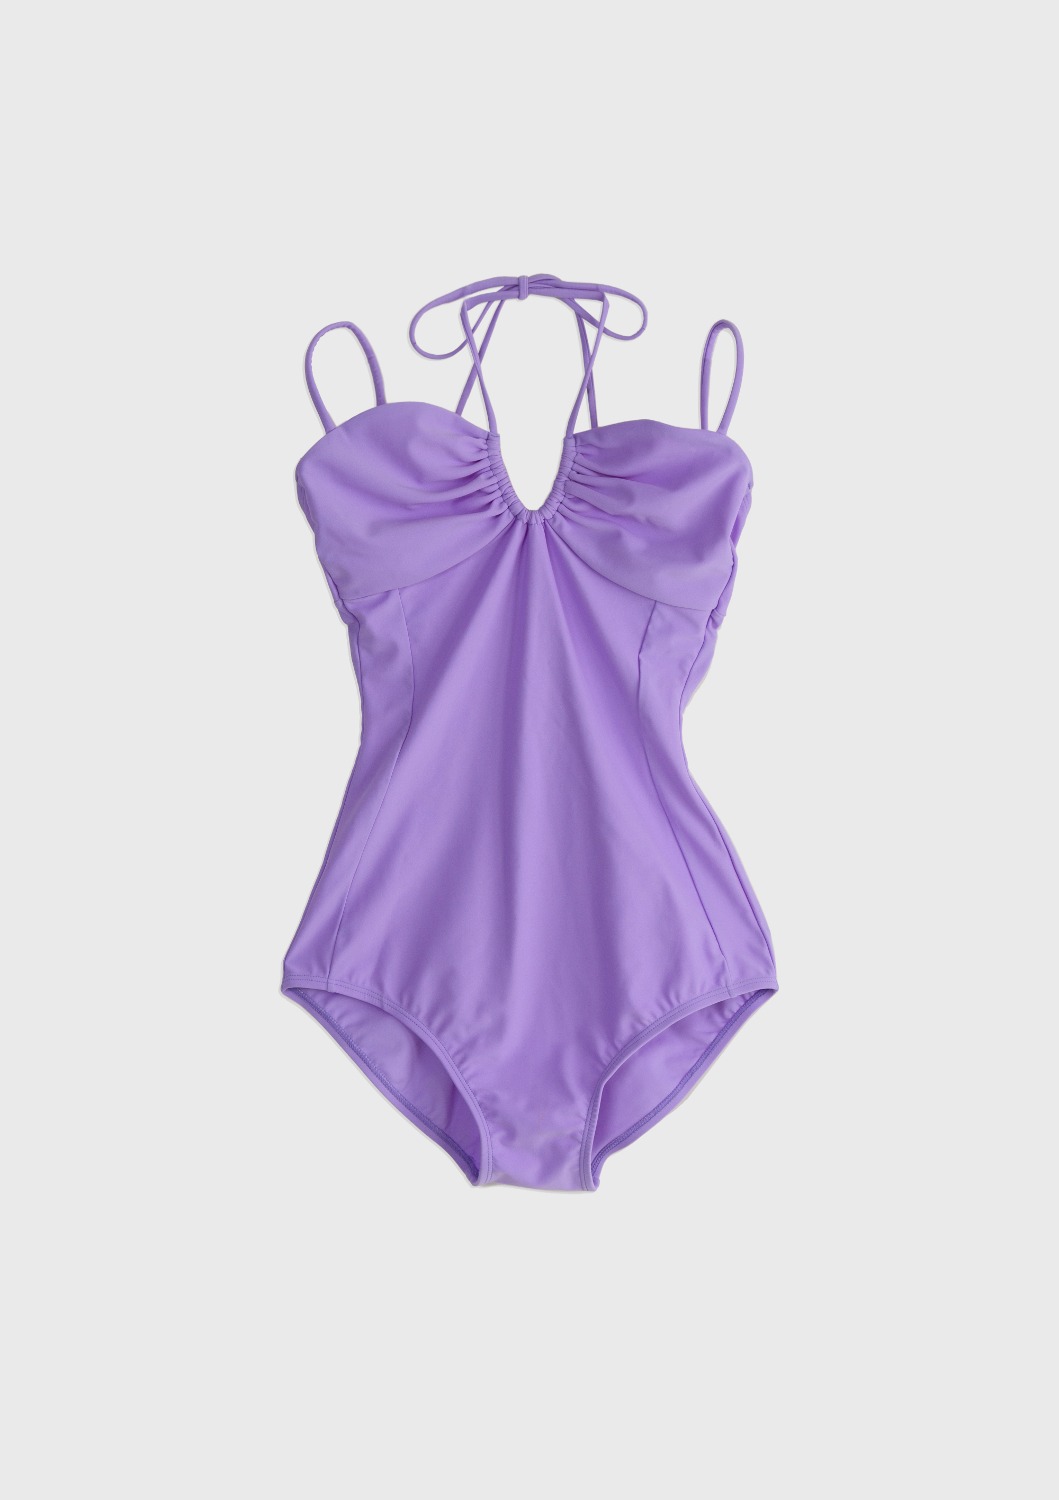 Mused Onepiece Swimsuit - Lavender